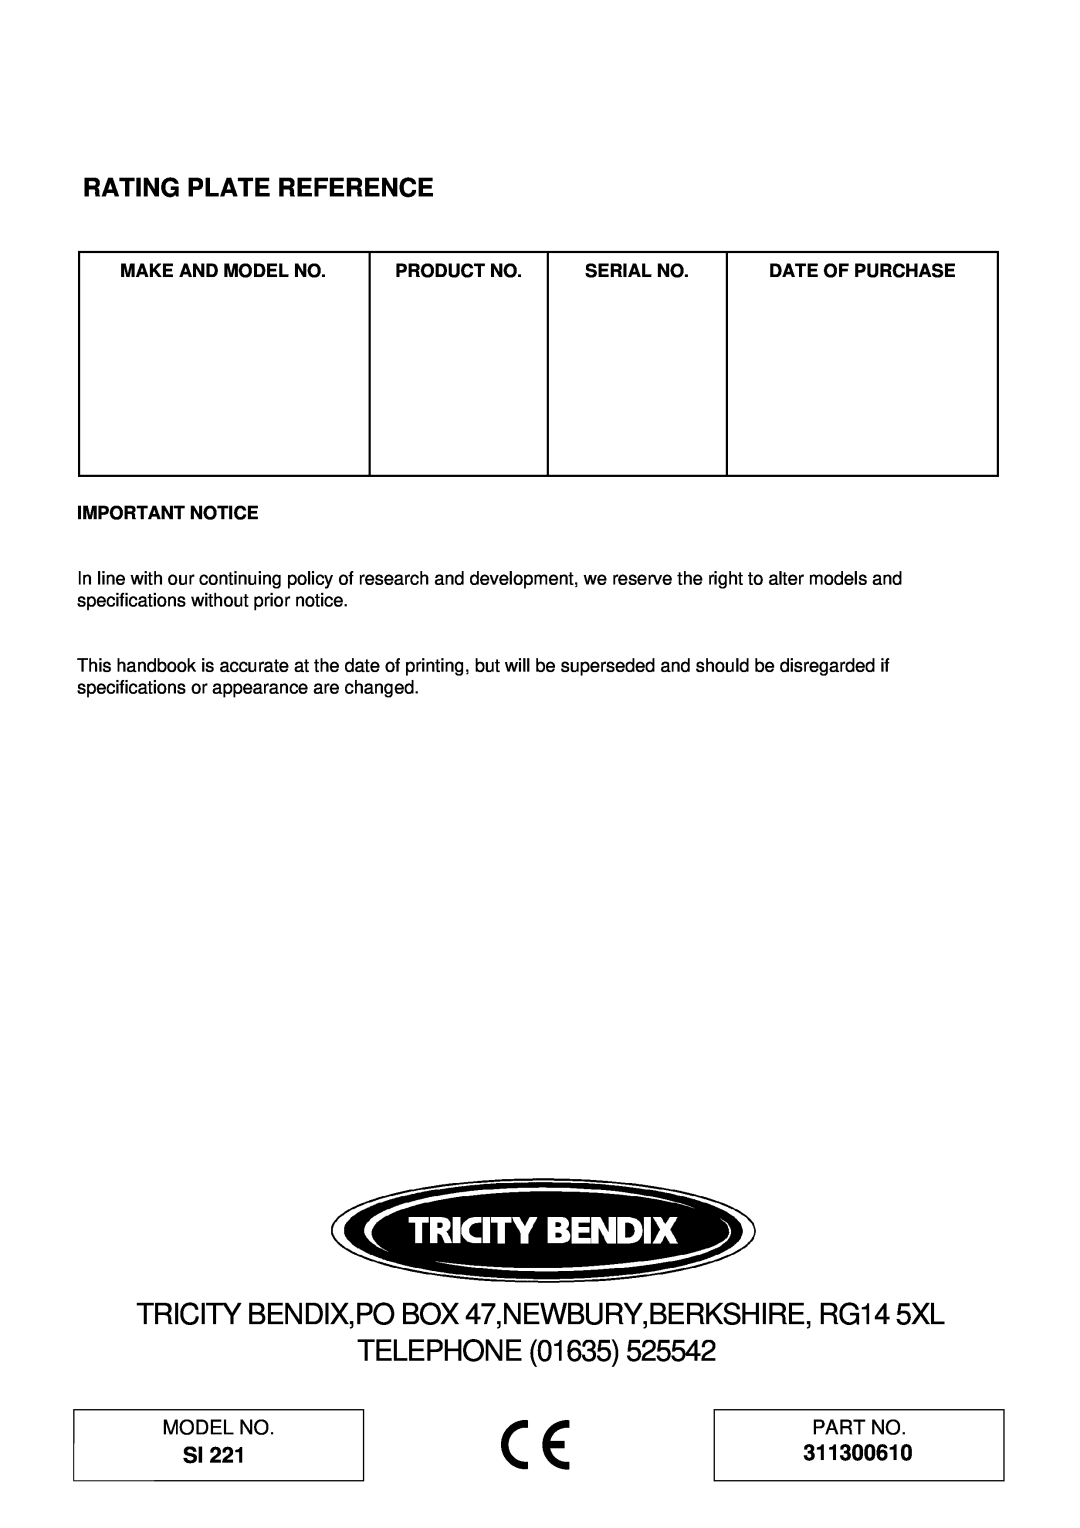 Tricity Bendix SI 221 Rating Plate Reference, 311300610, Telephone, Make And Model No, Product No, Serial No 